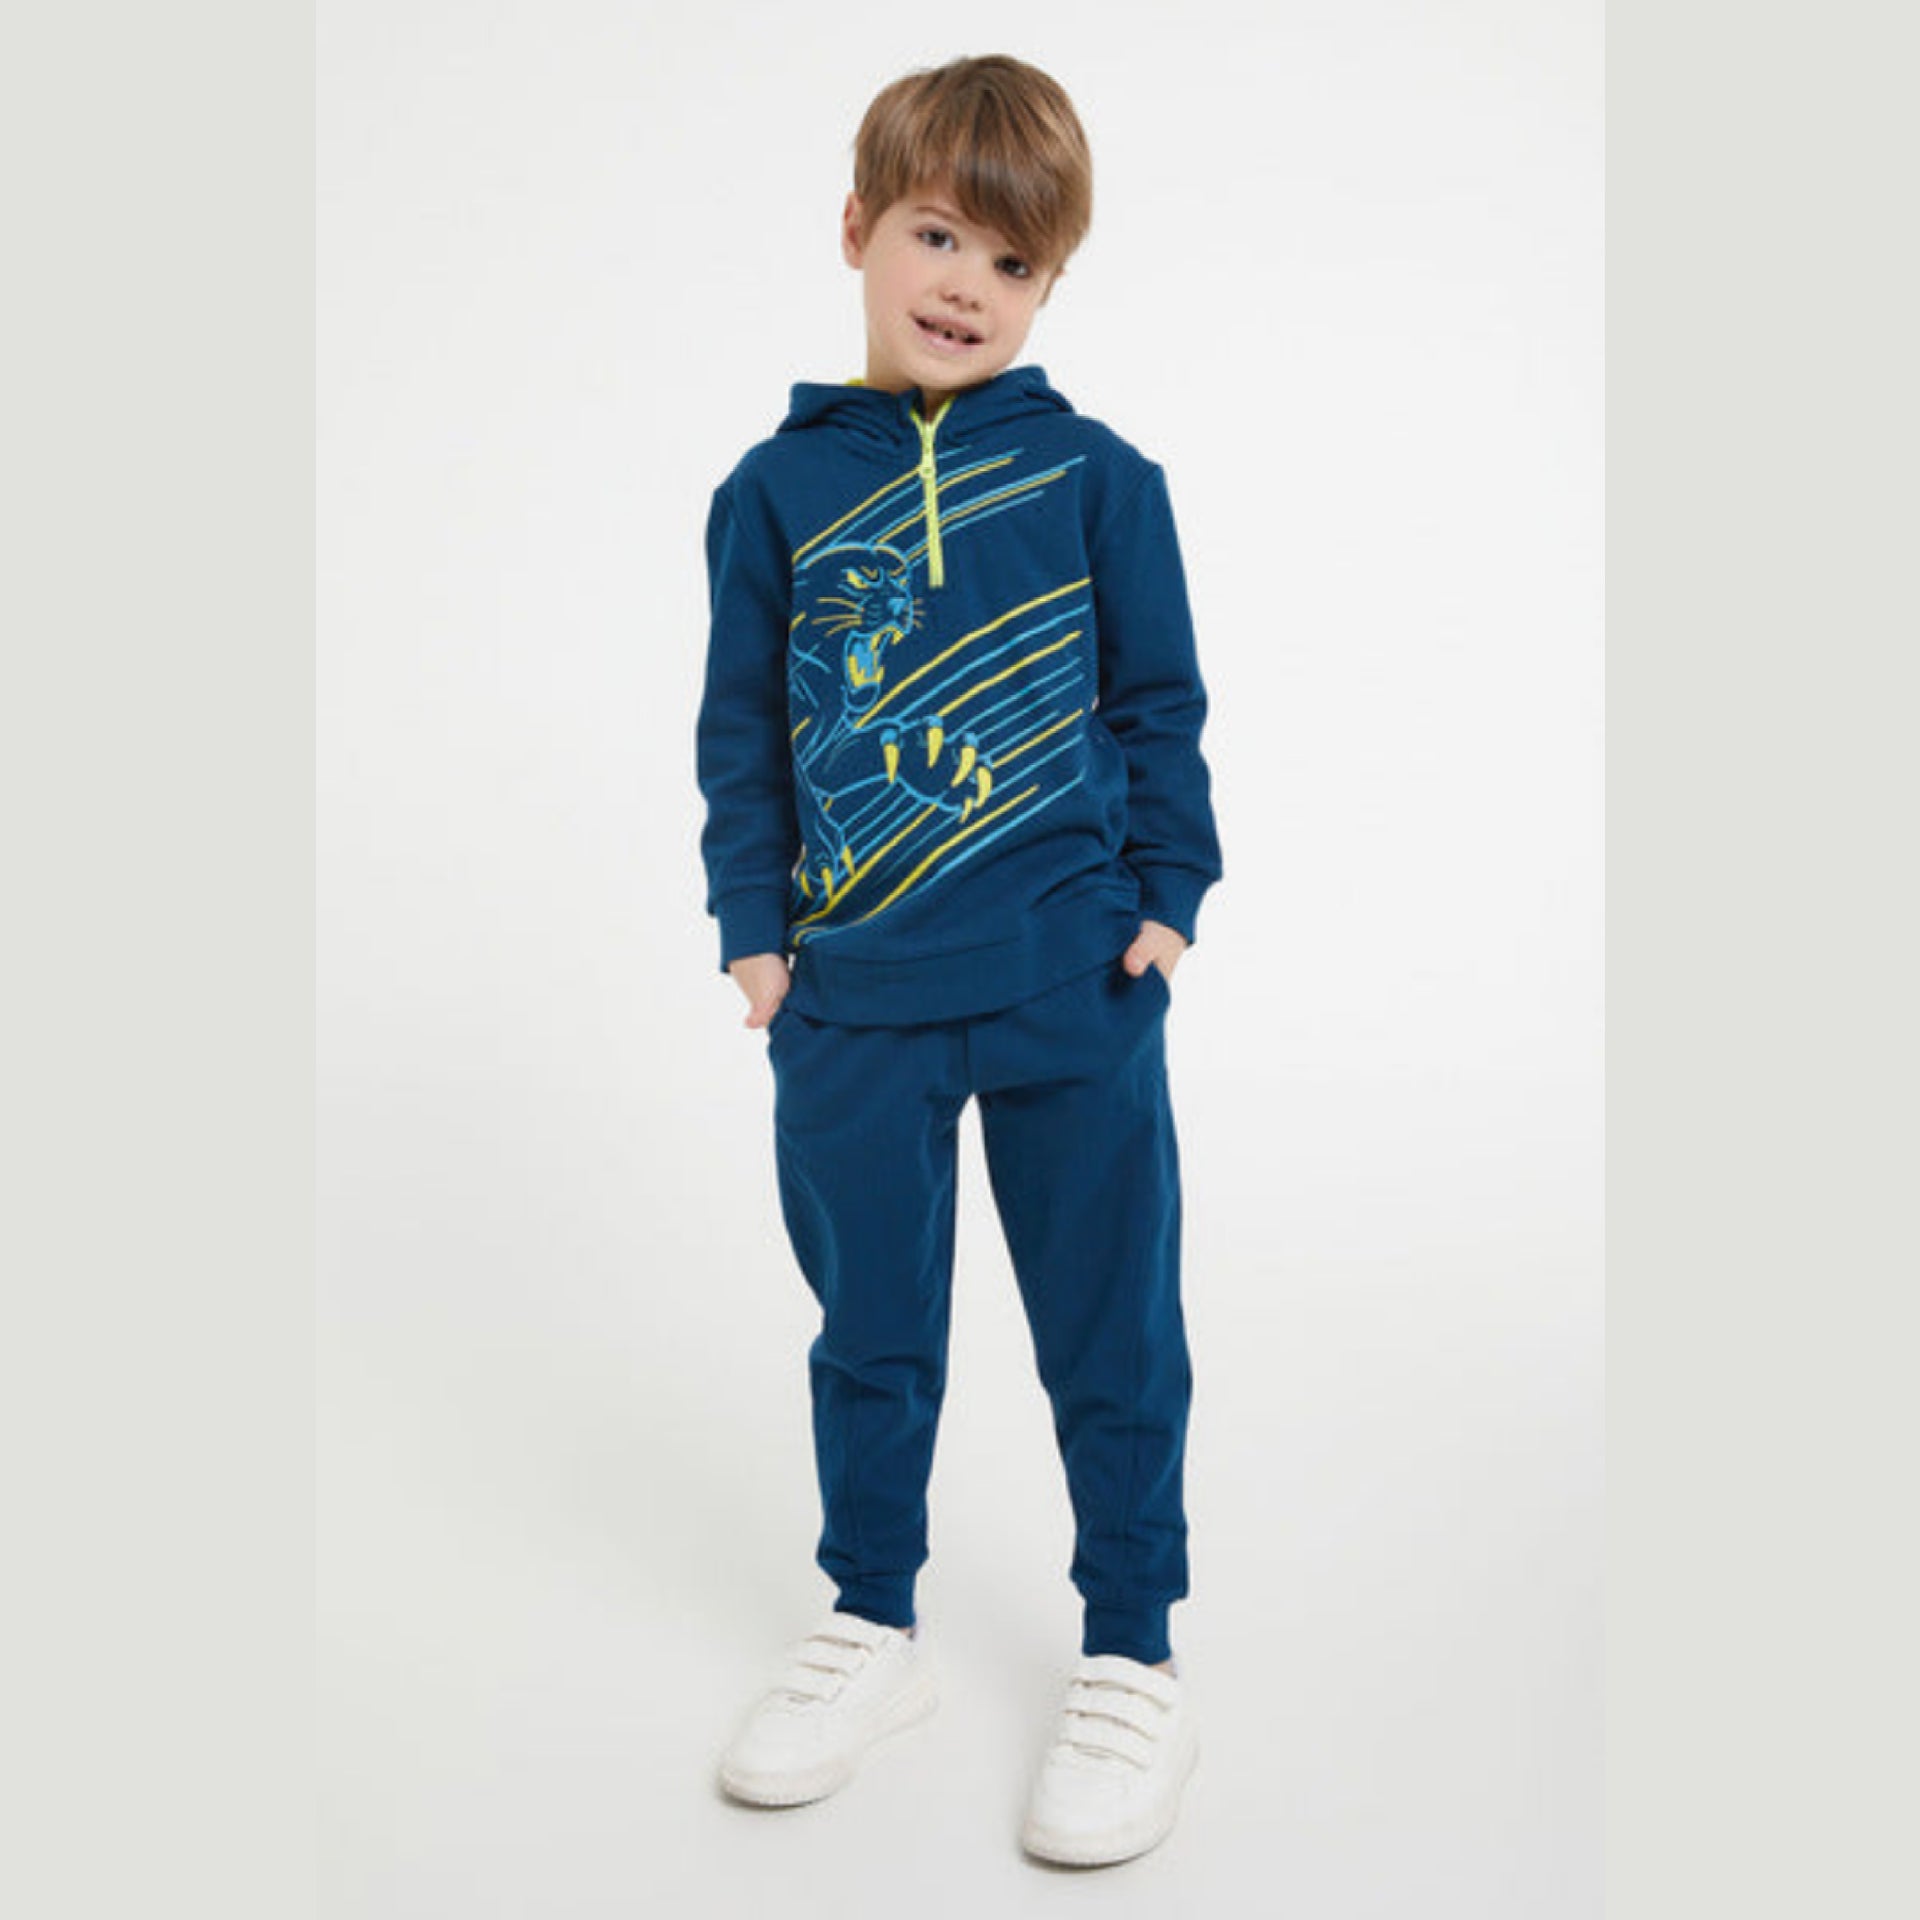 Tiger Blue Tracksuit Set - Tiger Blue Tracksuit Set - 9-10 Years - Rolypoly - Melymod